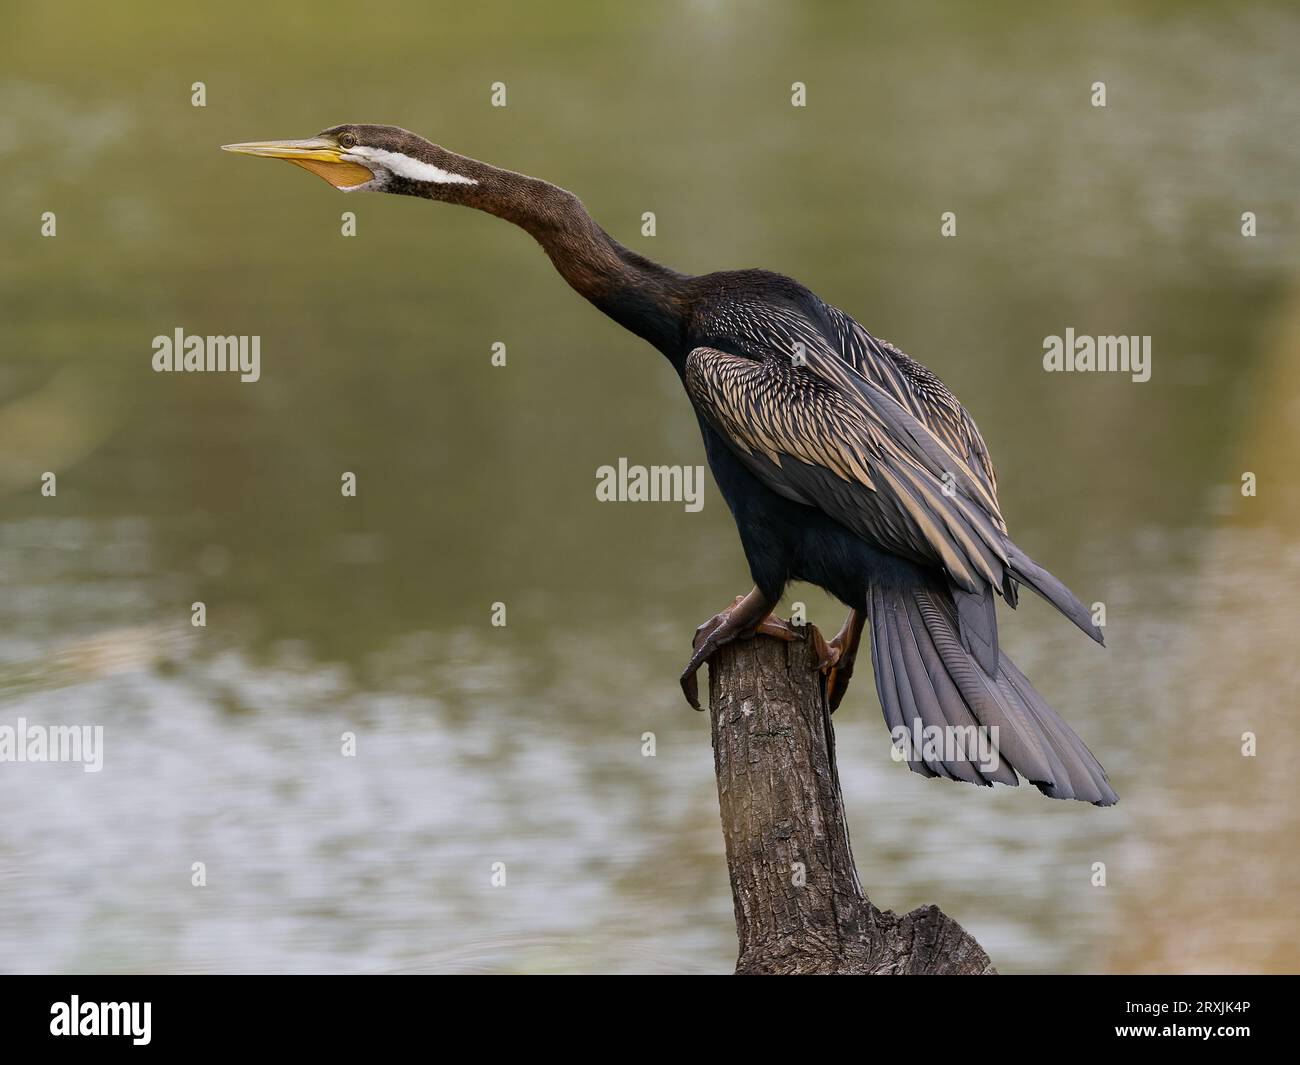 Long necked fish eating bird call a Darter.  Australian bird with dark feathers with lovely golden cream feathers on the wings. Stock Photo